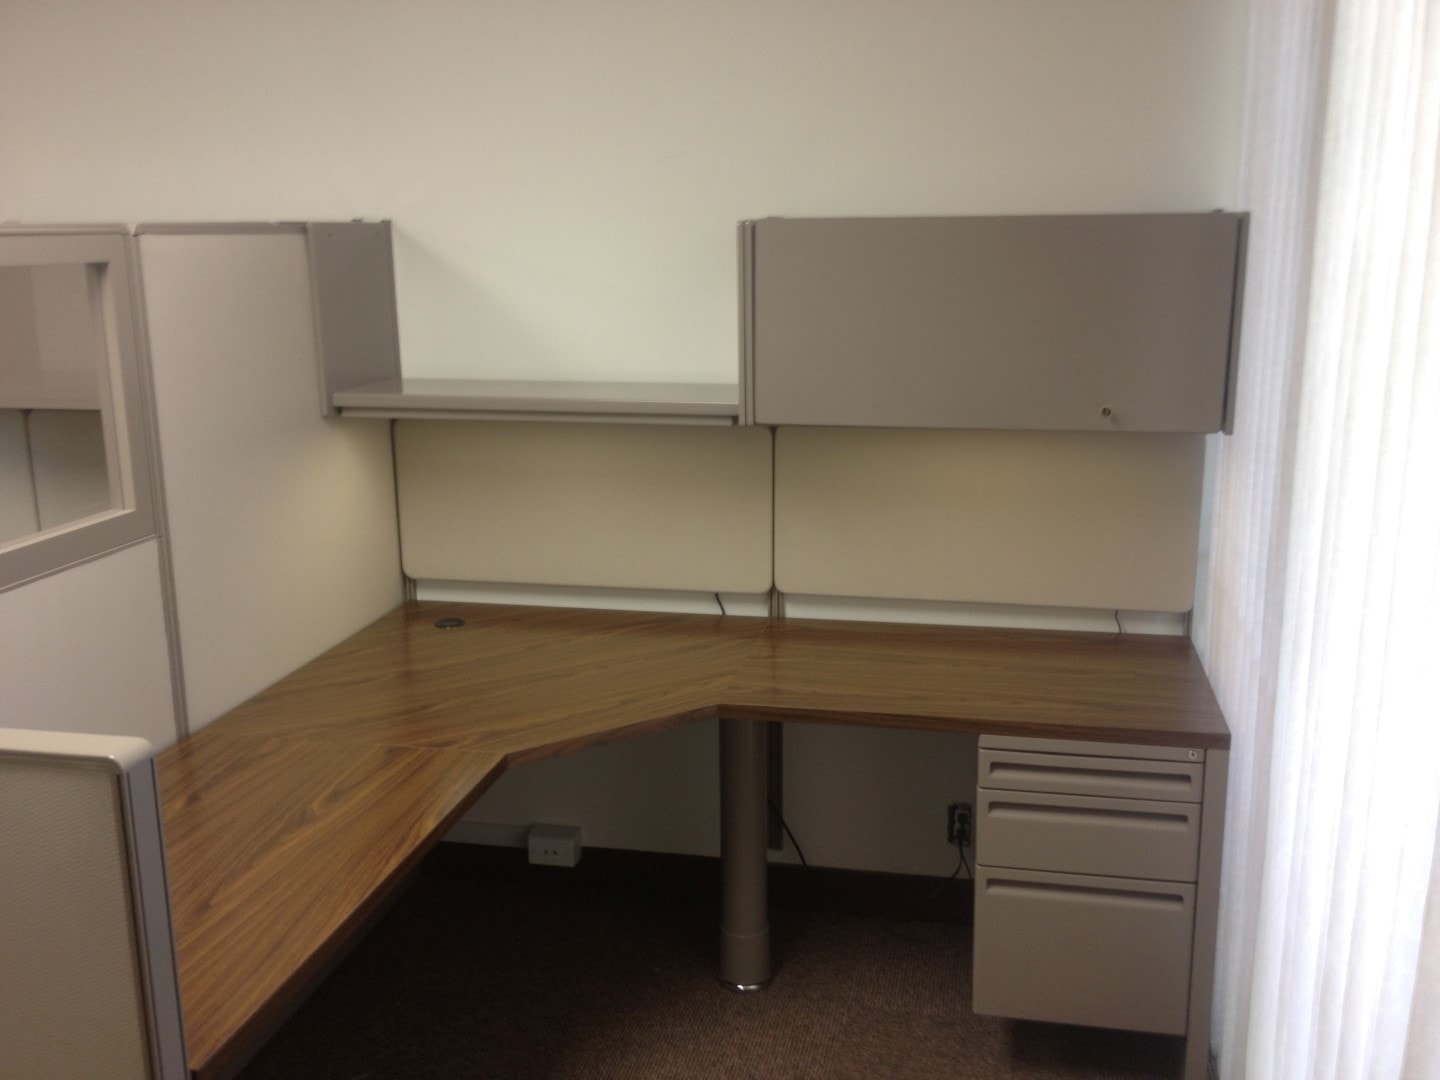 Cubicles in a private office